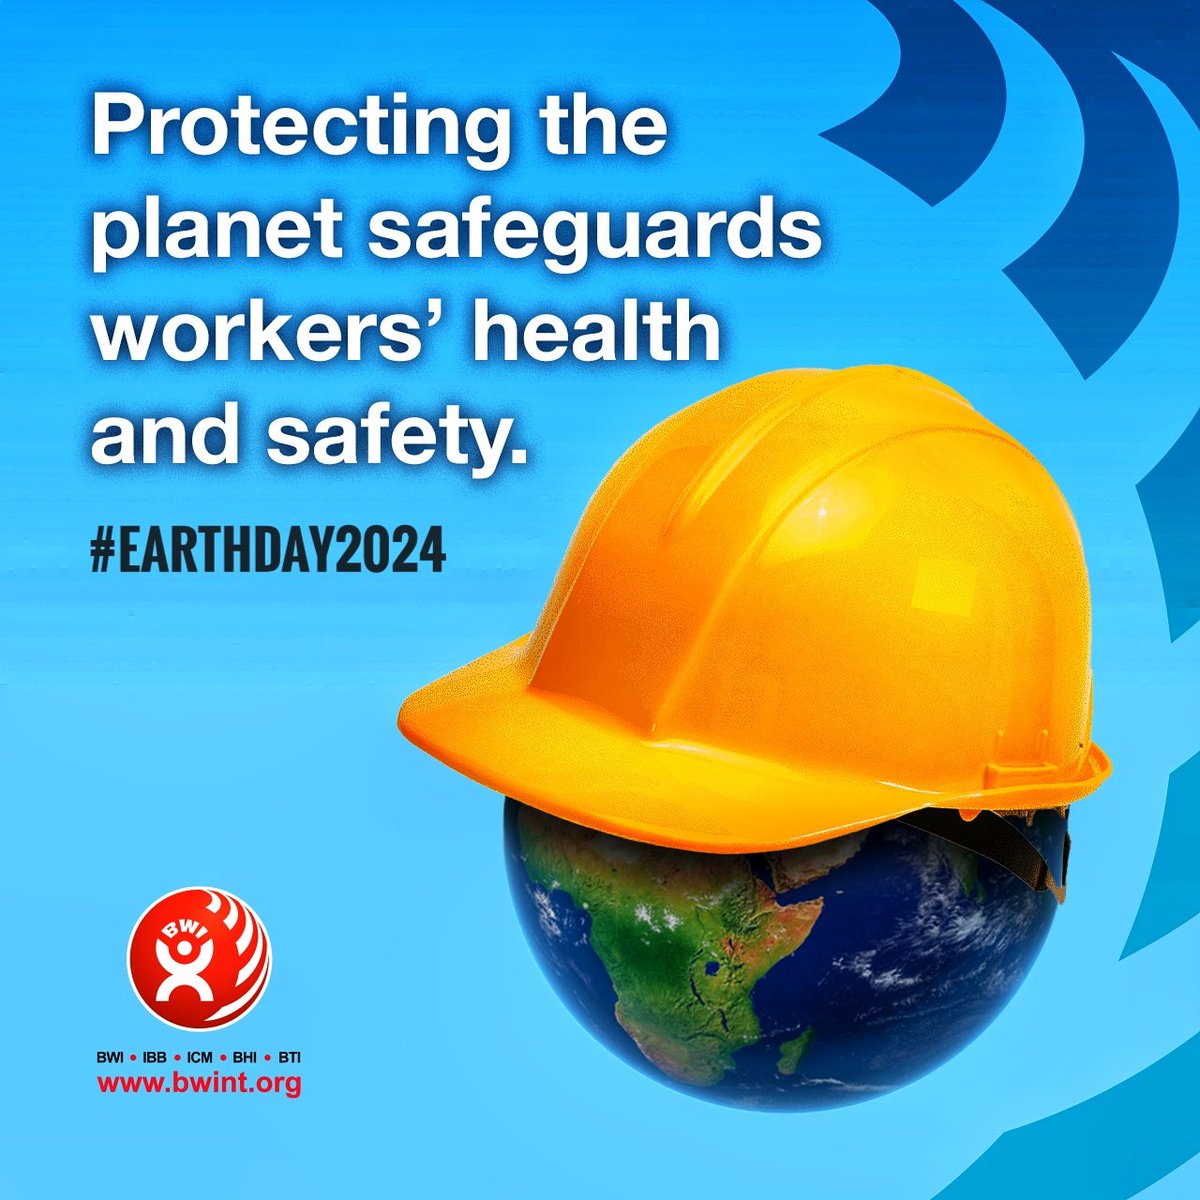 'Happy Earth Day 2024! Today, we honour our planet and recognise the vital need to protect it to secure workers' health and safety. Let's commit to sustainable practices for a healthier planet and workforce. 🌍💚✊️👷‍♀️👷 #EarthDay2024